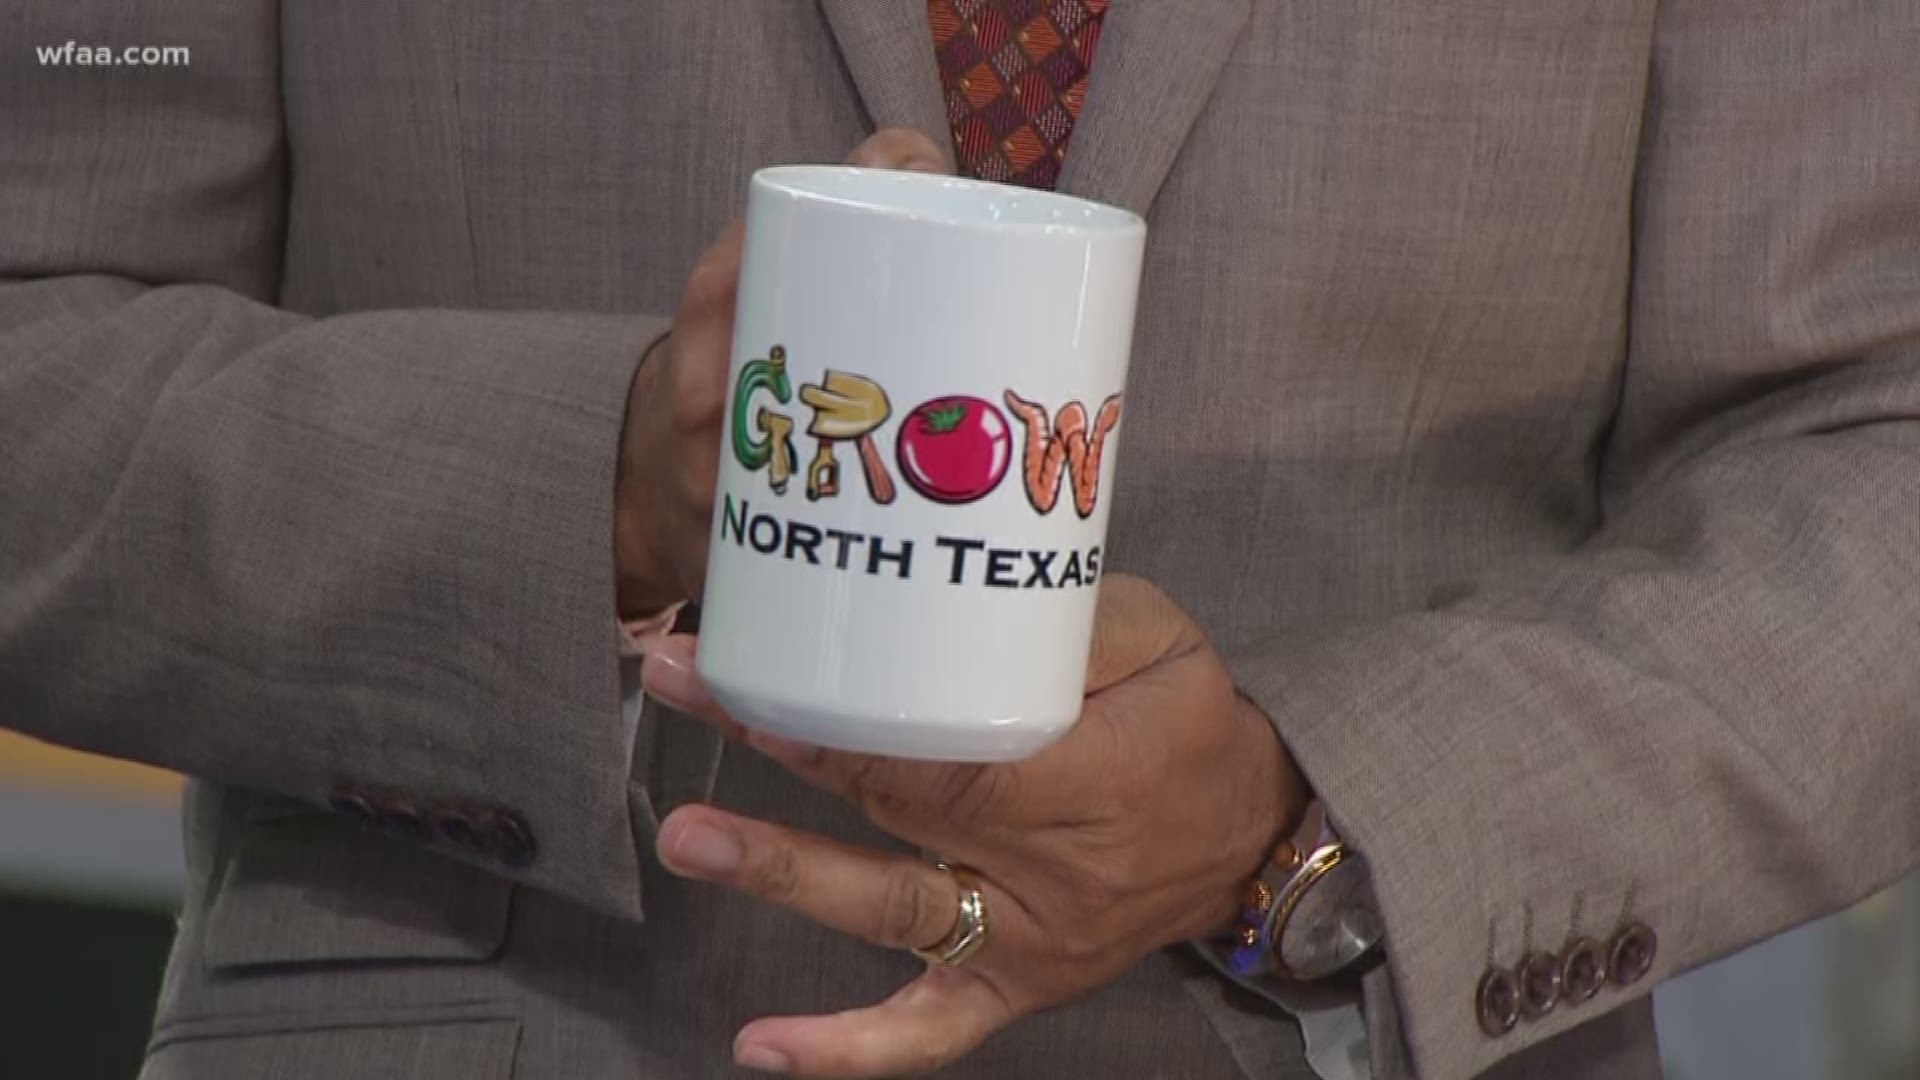 What's up with Greg's cup? Grow North Texas